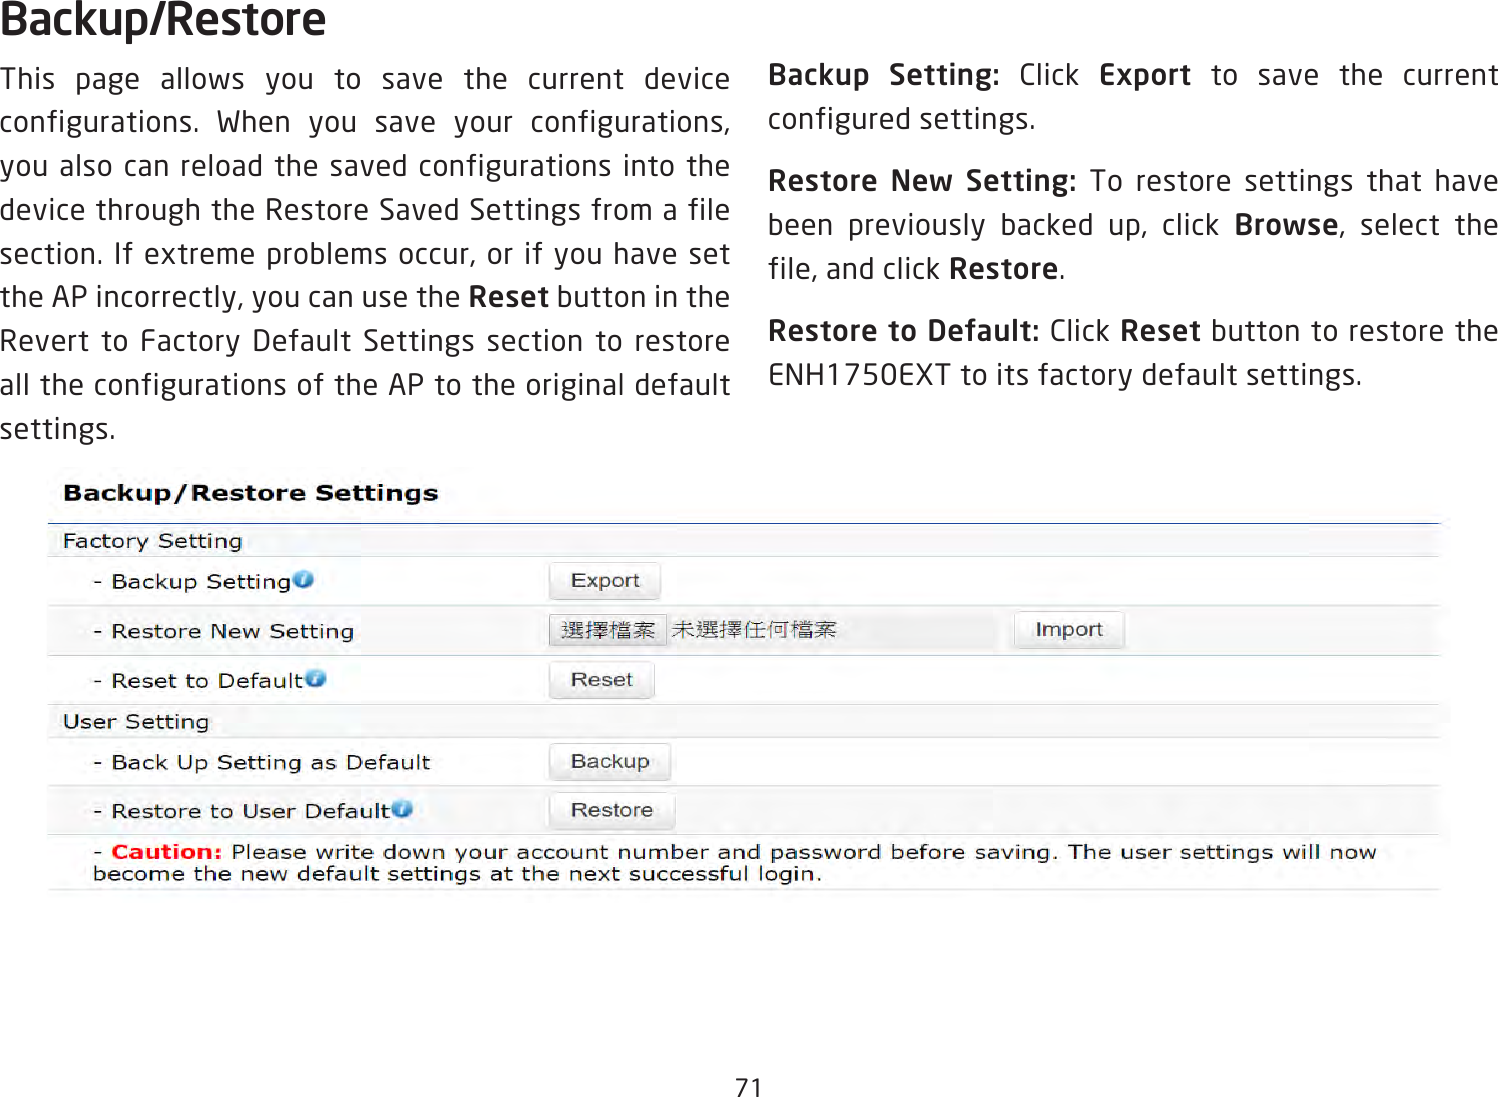 71Backup/RestoreThis page allows you to save the current device configurations. When you save your configurations, you also can reload the saved configurations into the device through the Restore Saved Settings from a file section. If extreme problems occur, or if you have set the AP incorrectly, you can use the Reset button in the Revert to Factory Default Settings section to restore all the configurations of the AP to the original default settings.Backup Setting: Click Export to save the current configured settings.Restore New Setting: To restore settings that have been previously backed up, click Browse, select the file, and click Restore.Restore to Default: Click Reset button to restore the ENH1750EXT to its factory default settings.